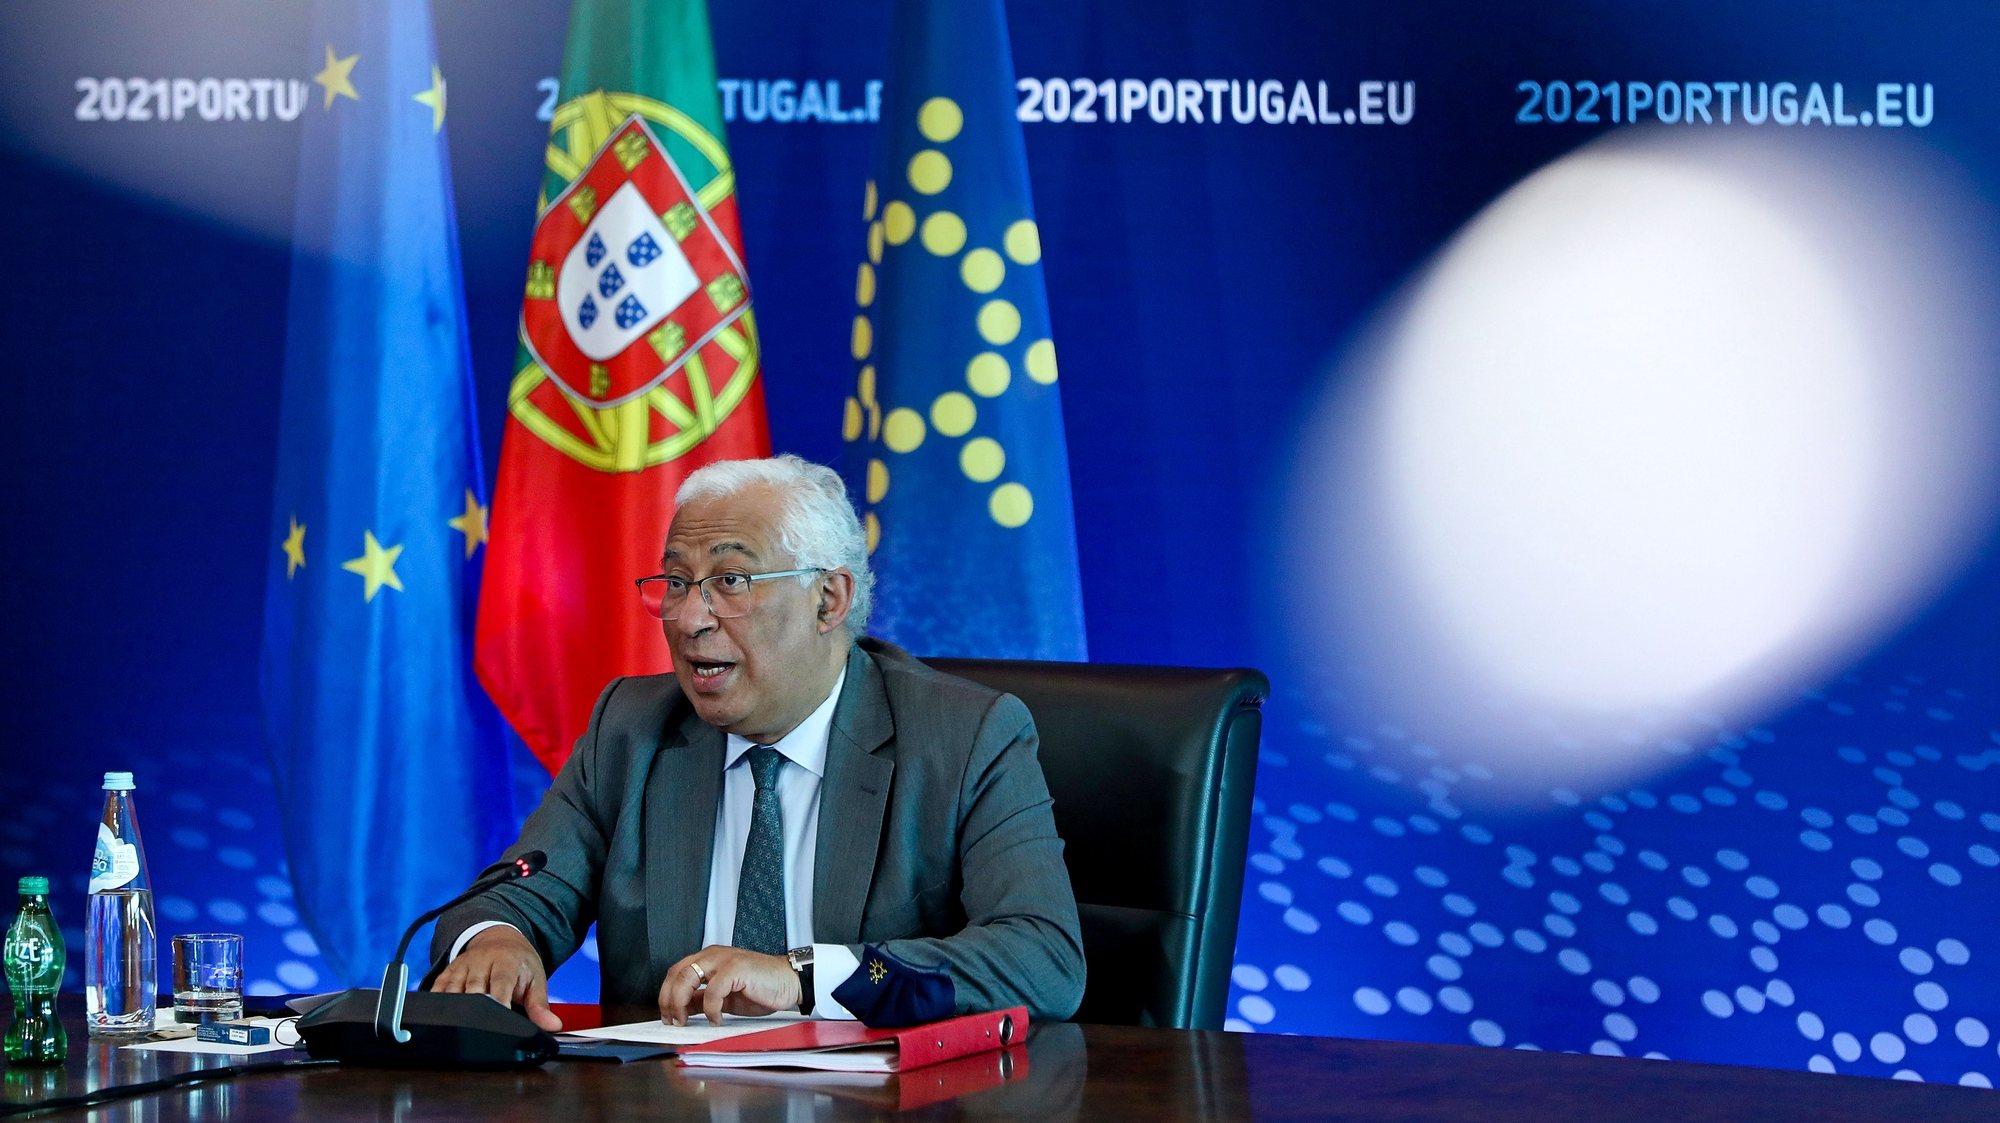 Portuguese Prime Minister Antonio Costa arrives to attend a video conference of the members of the European Council to discuss the current situation of the COVID-19 pandemic, preparedness for health threats, security and defence, and relations with the Southern Neighbourhood, in Lisbon, Portugal, 25 February 2021. ANTONIO PEDRO SANTOS/LUSA